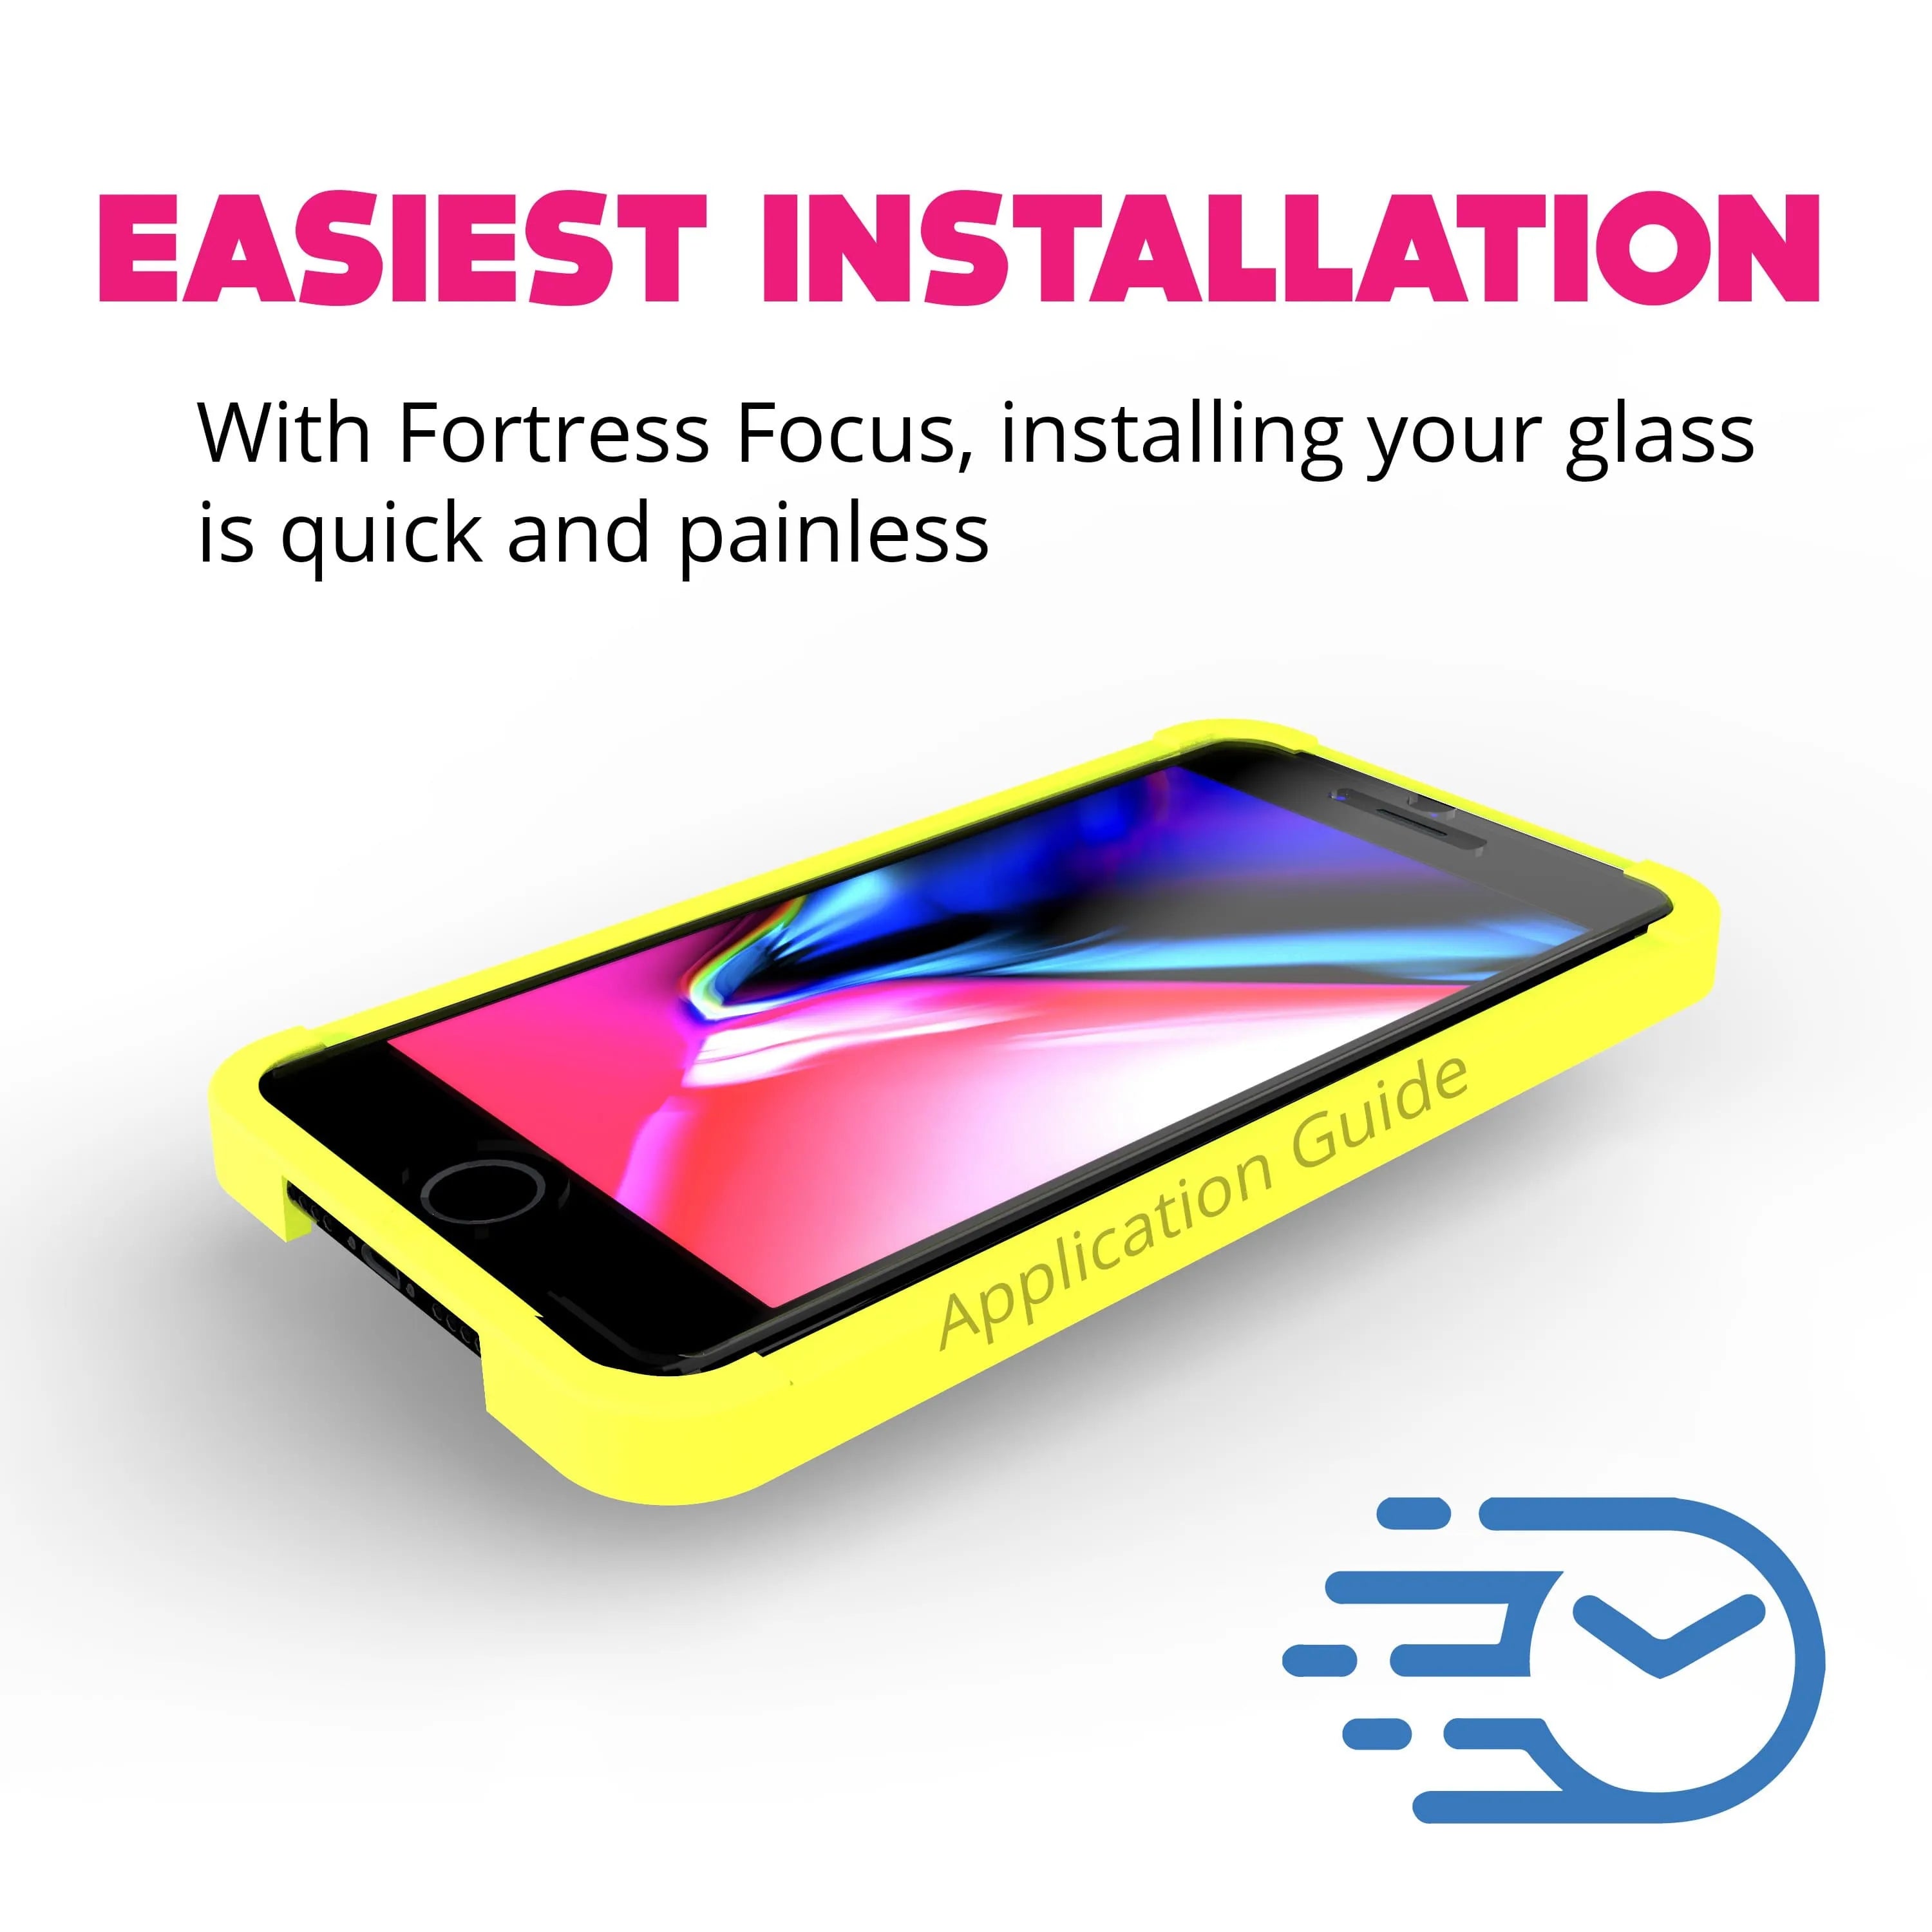 Fortress iPhone SE/8/7 Screen Protector - $200 Device Coverage  Scooch Screen Protector